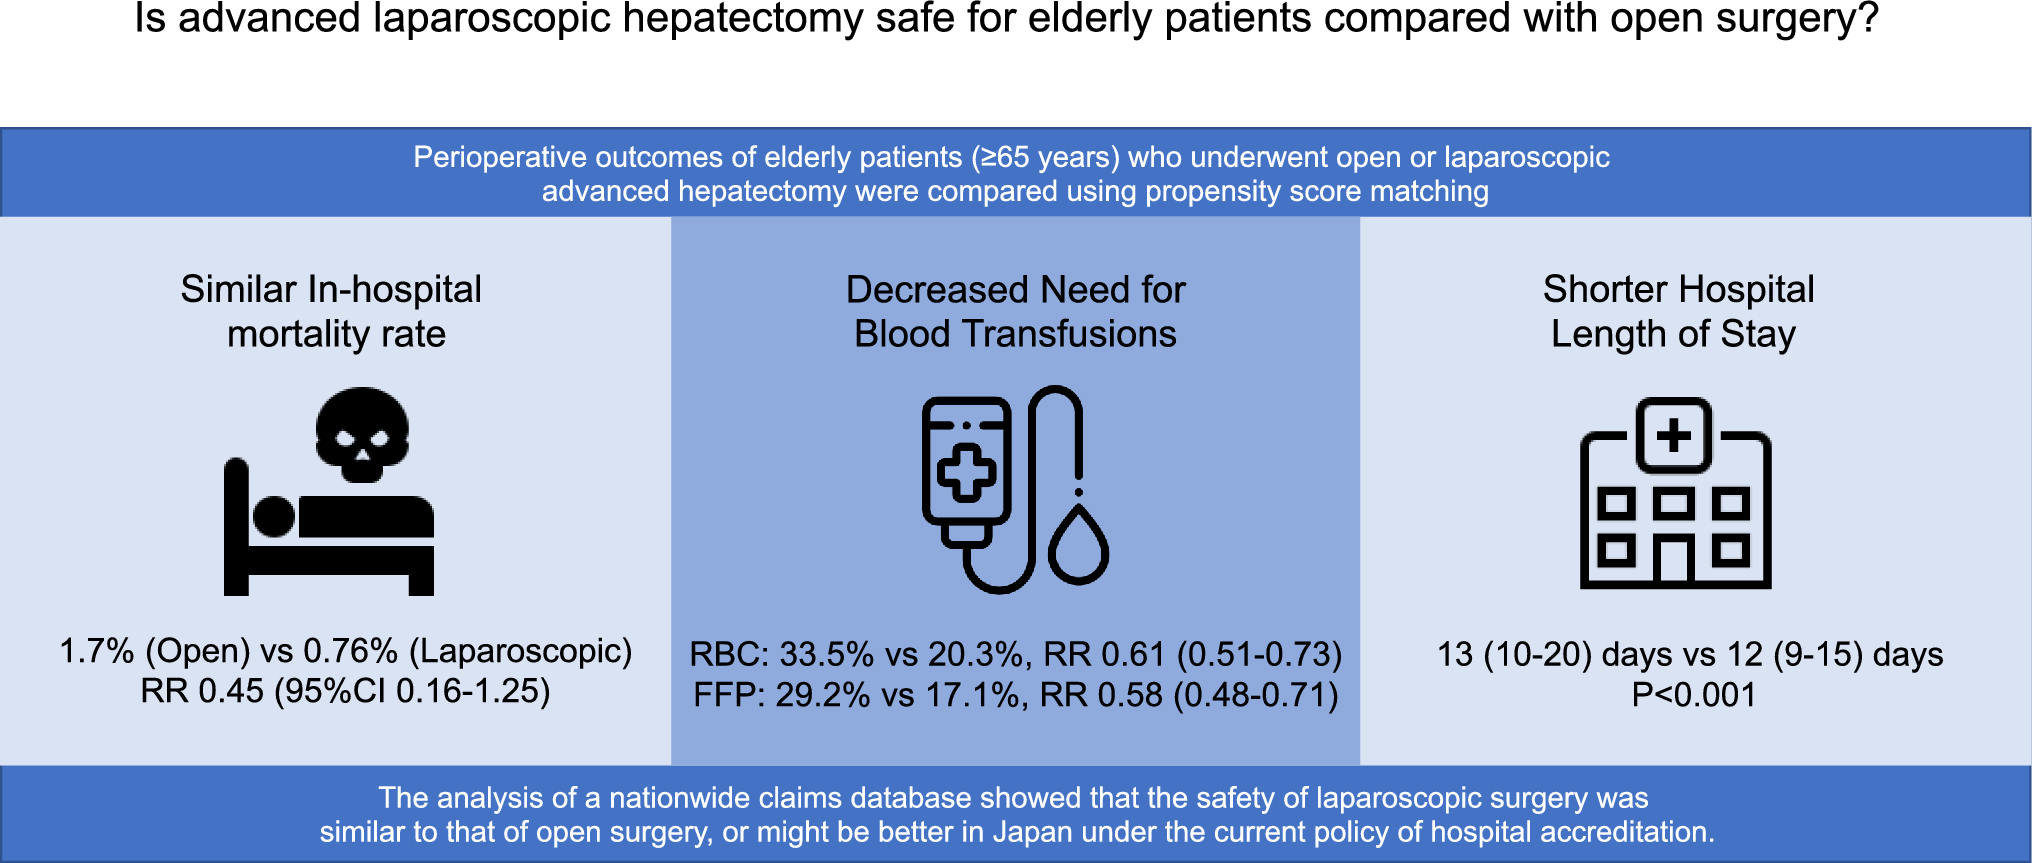 Safety of advanced laparoscopic hepatectomy for elderly patients: a Japanese nationwide analysis